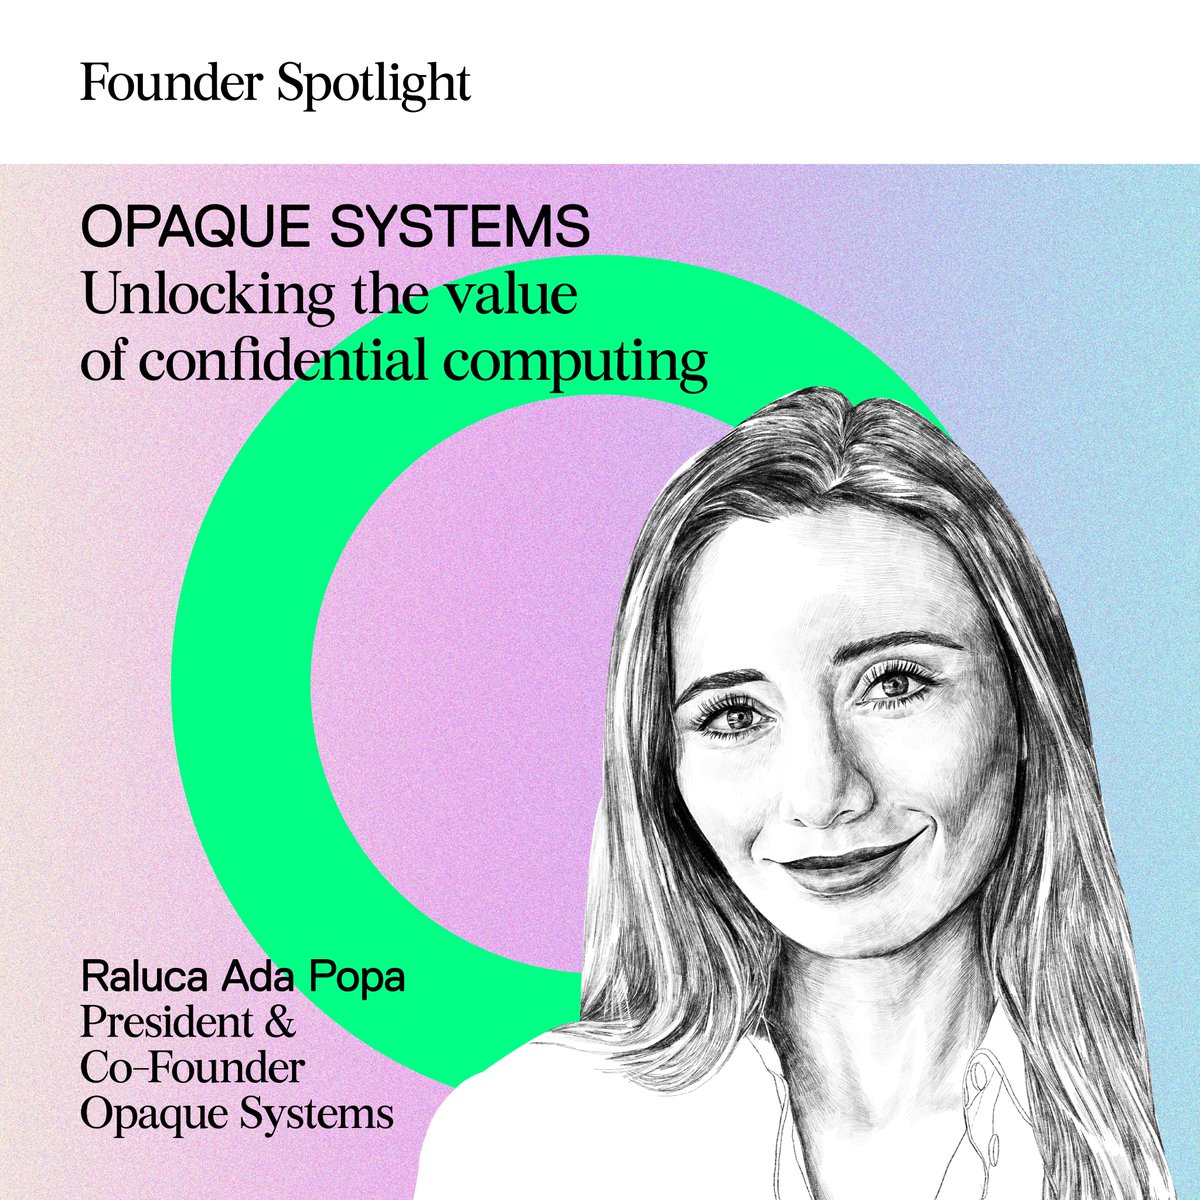 The Rise of #ConfidentialComputing: “We saw a growing need from companies who were looking for new solutions to handle their confidential data,” says @ralucaadapopa of @opaquesys. “It was becoming super clear that organizations need a solution like Opaque”.